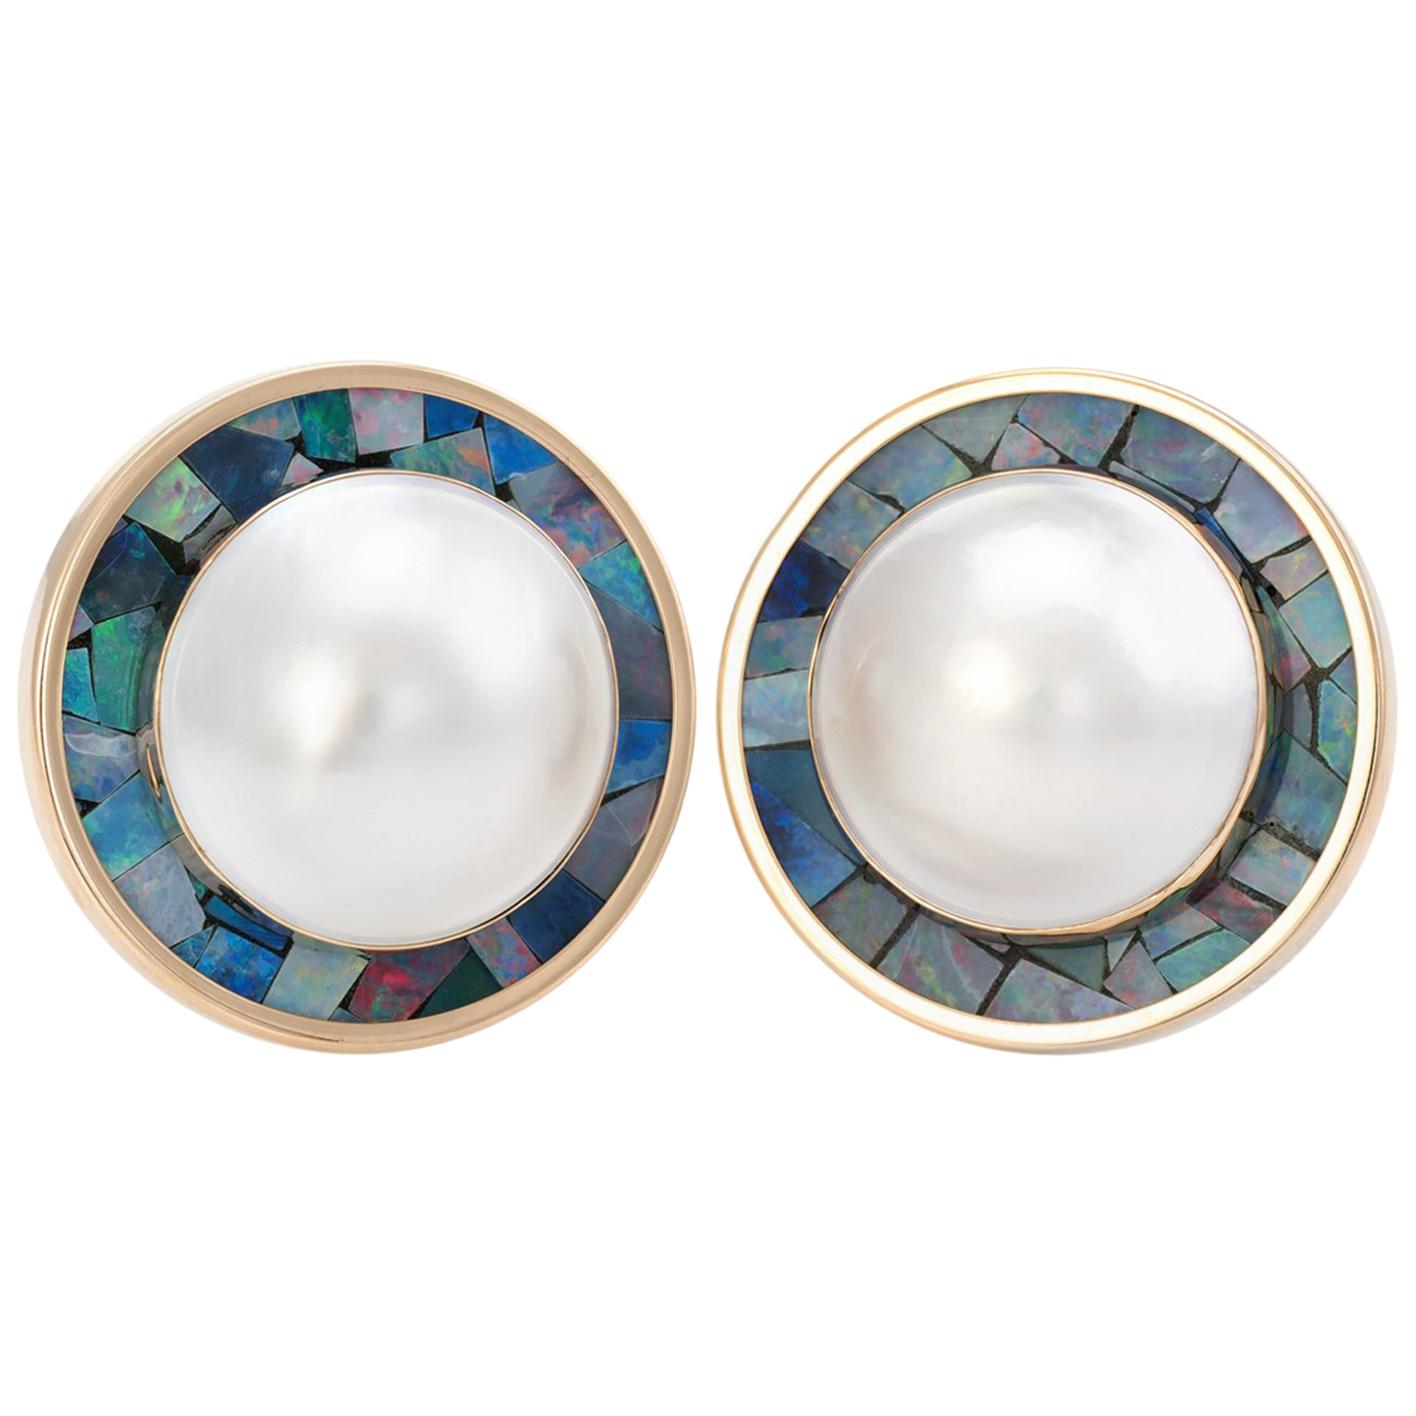 Vintage Mabe Pearl Earrings Inlaid Opal Round 14 Karat Gold Estate Jewelry